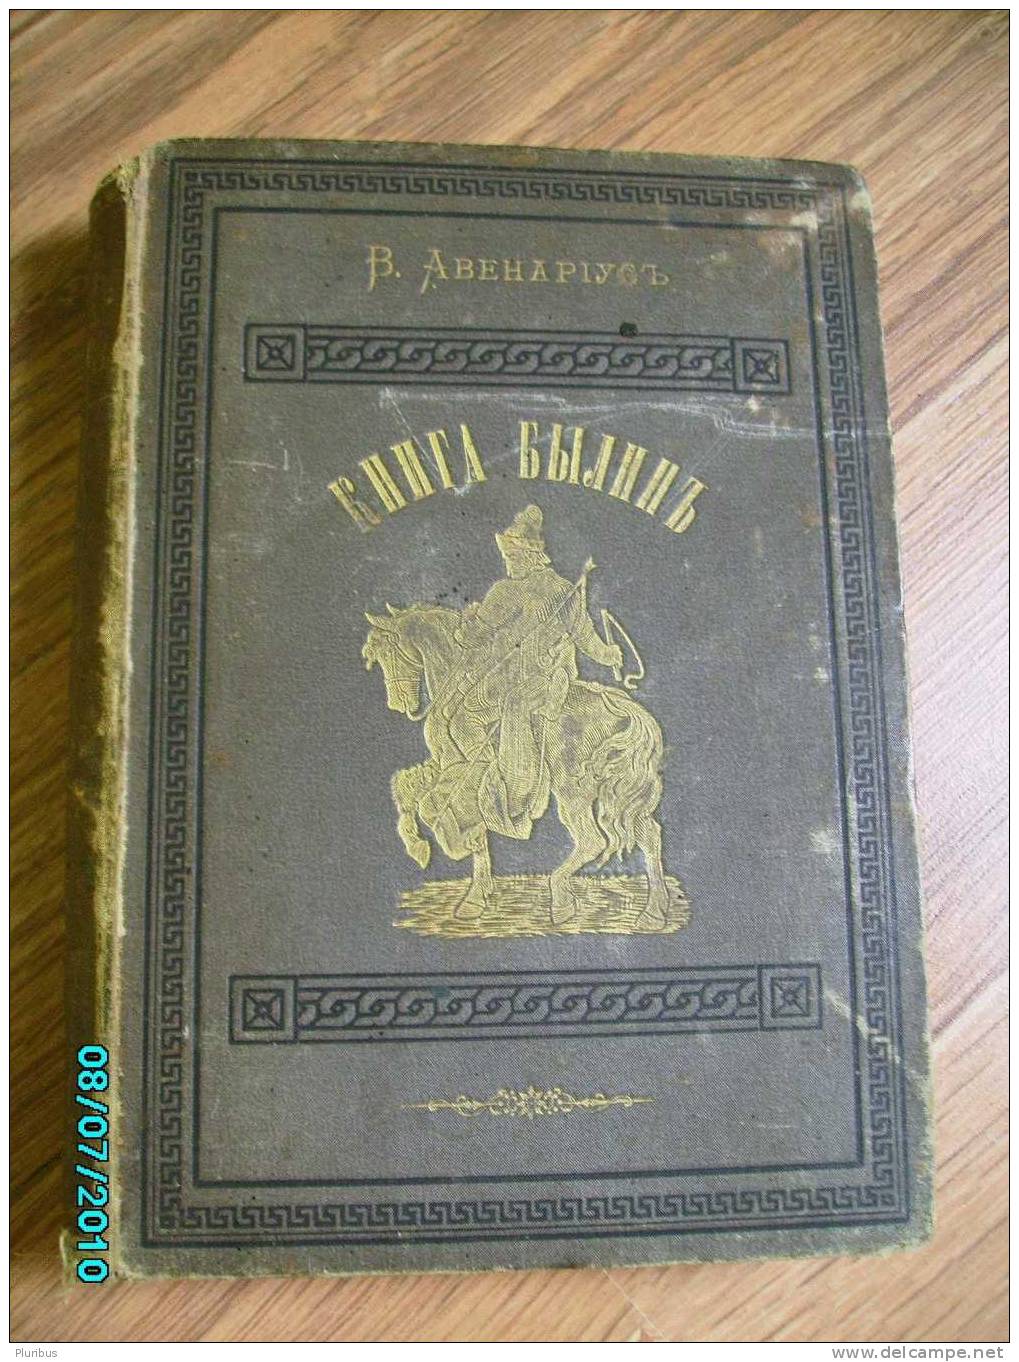 1880, IMP.RUSSIA, AVENARIUS, BOOK OF BYLINAS (SAGAS),  355  PAGES IN RUSSIAN - Langues Slaves